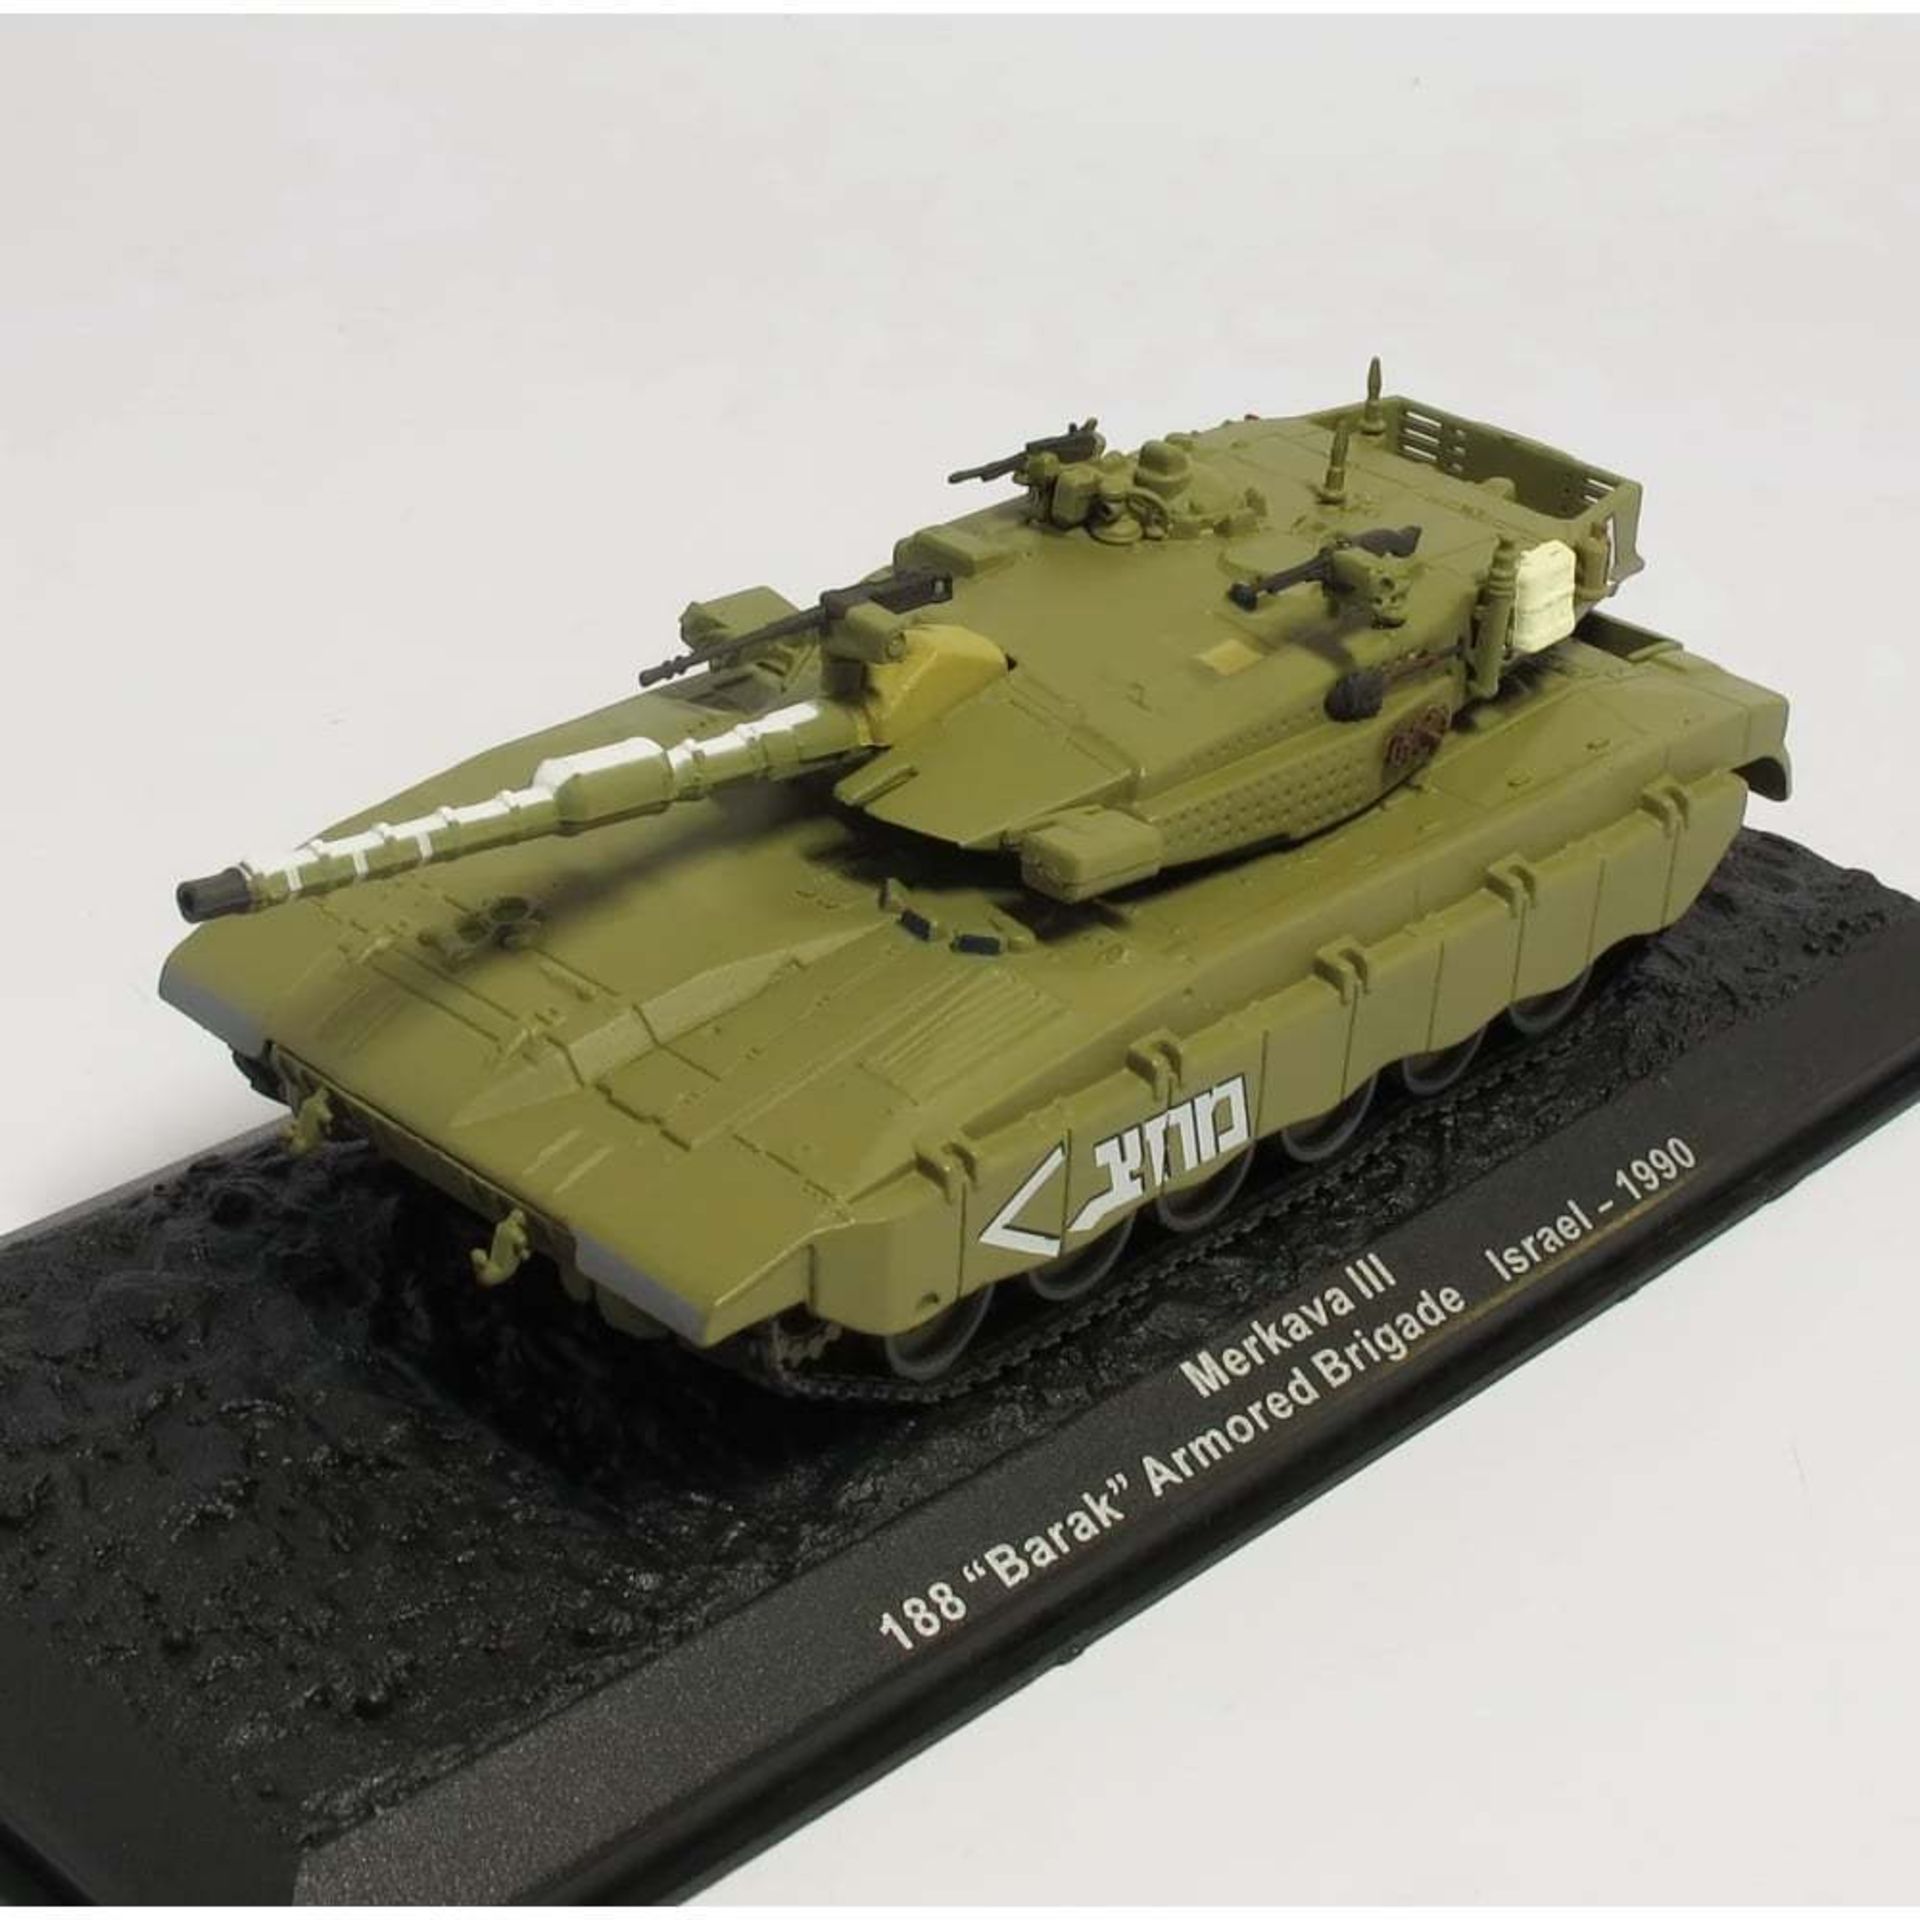 V Grade A Merkava III 1/72 Diecast and Plastic 1/72 Scale Model Tank X 2 YOUR BID PRICE TO BE